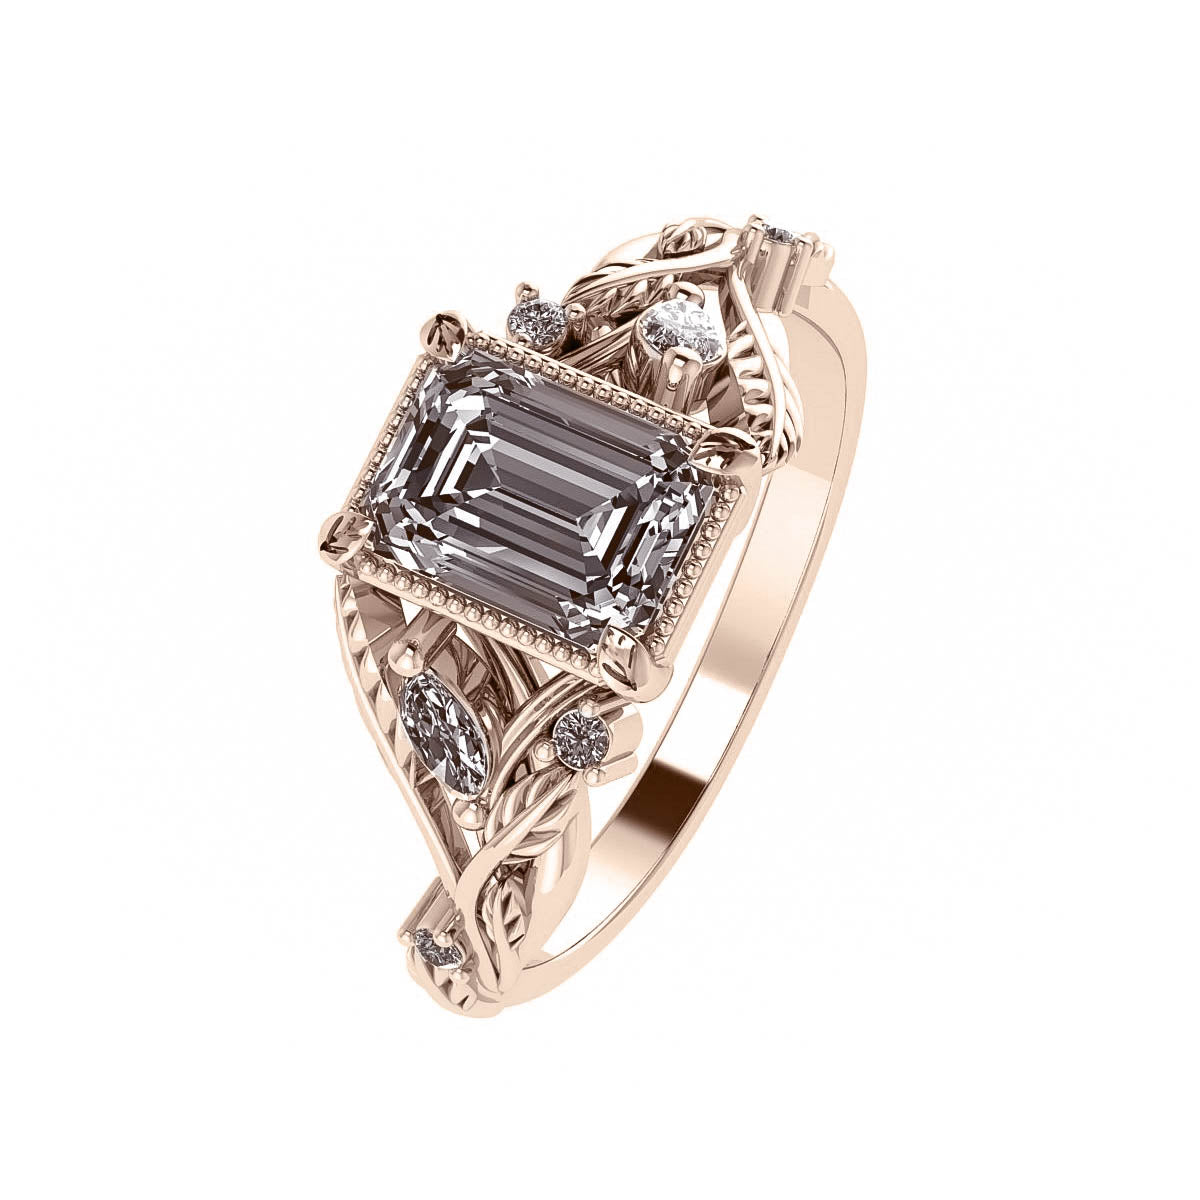 Patricia asymmetric | engagement ring setting with emerald cut gemstone 7x5 mm - Eden Garden Jewelry™